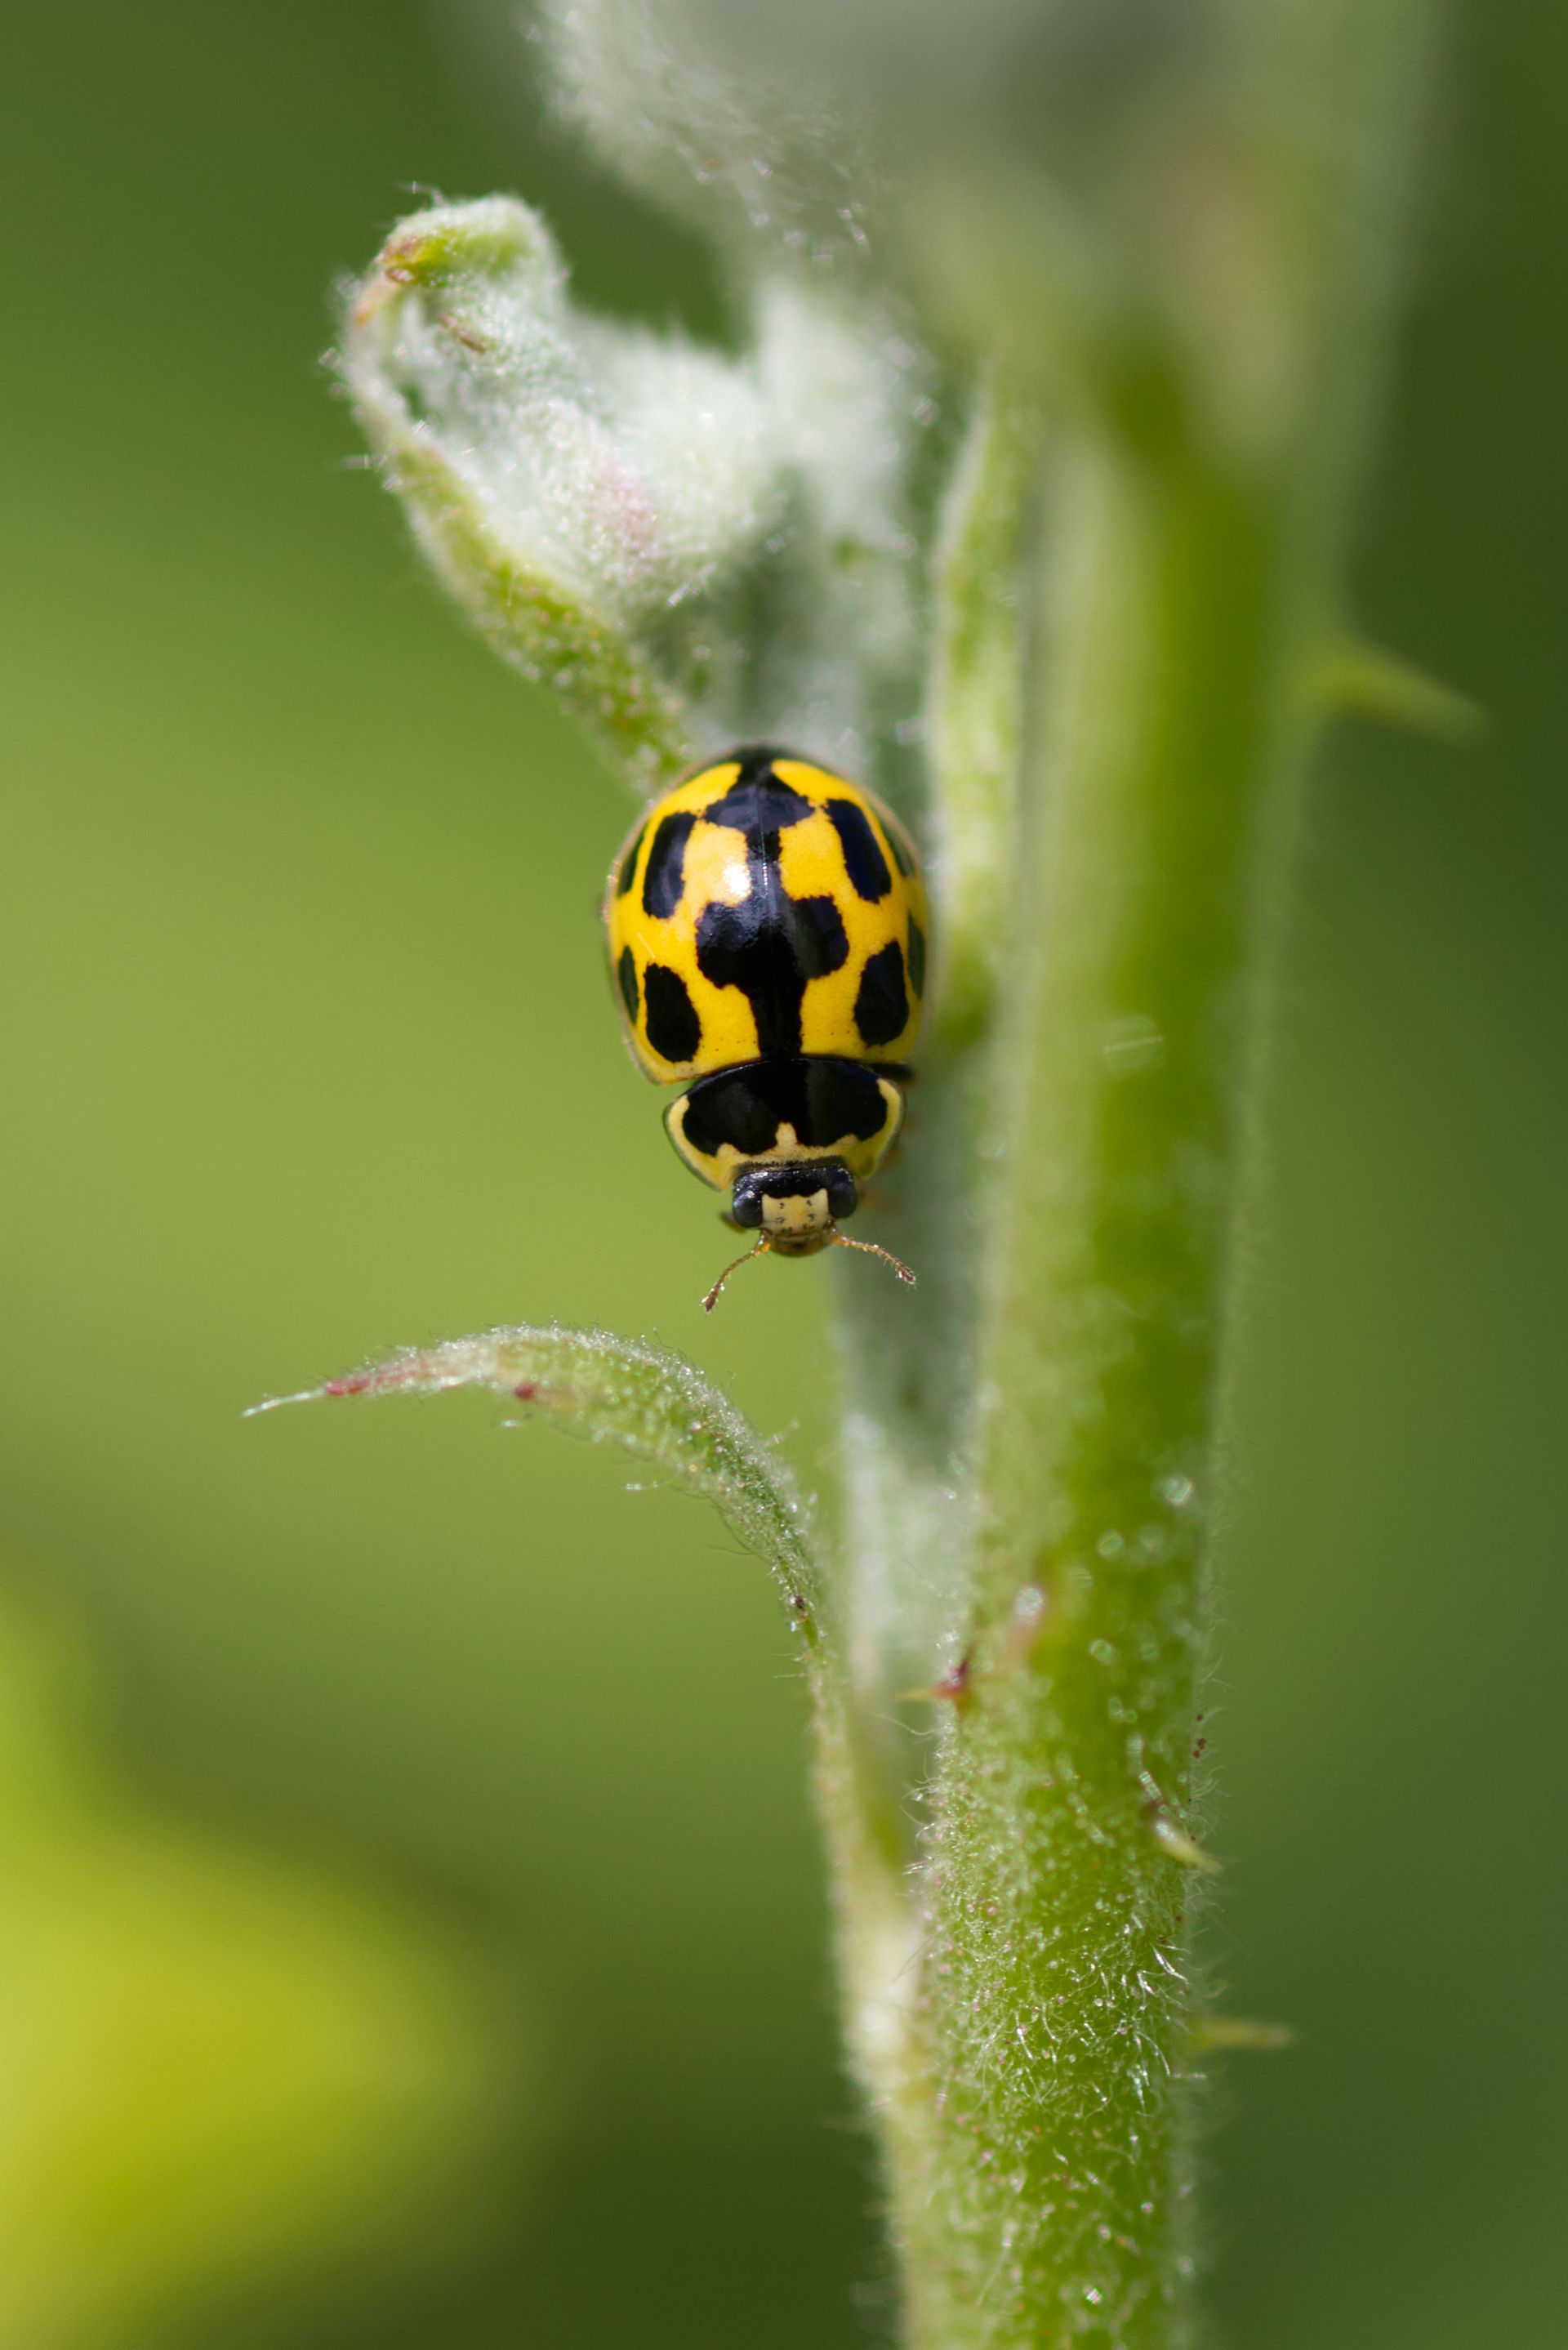 A yellow and black ladybug is sitting on a green plant.